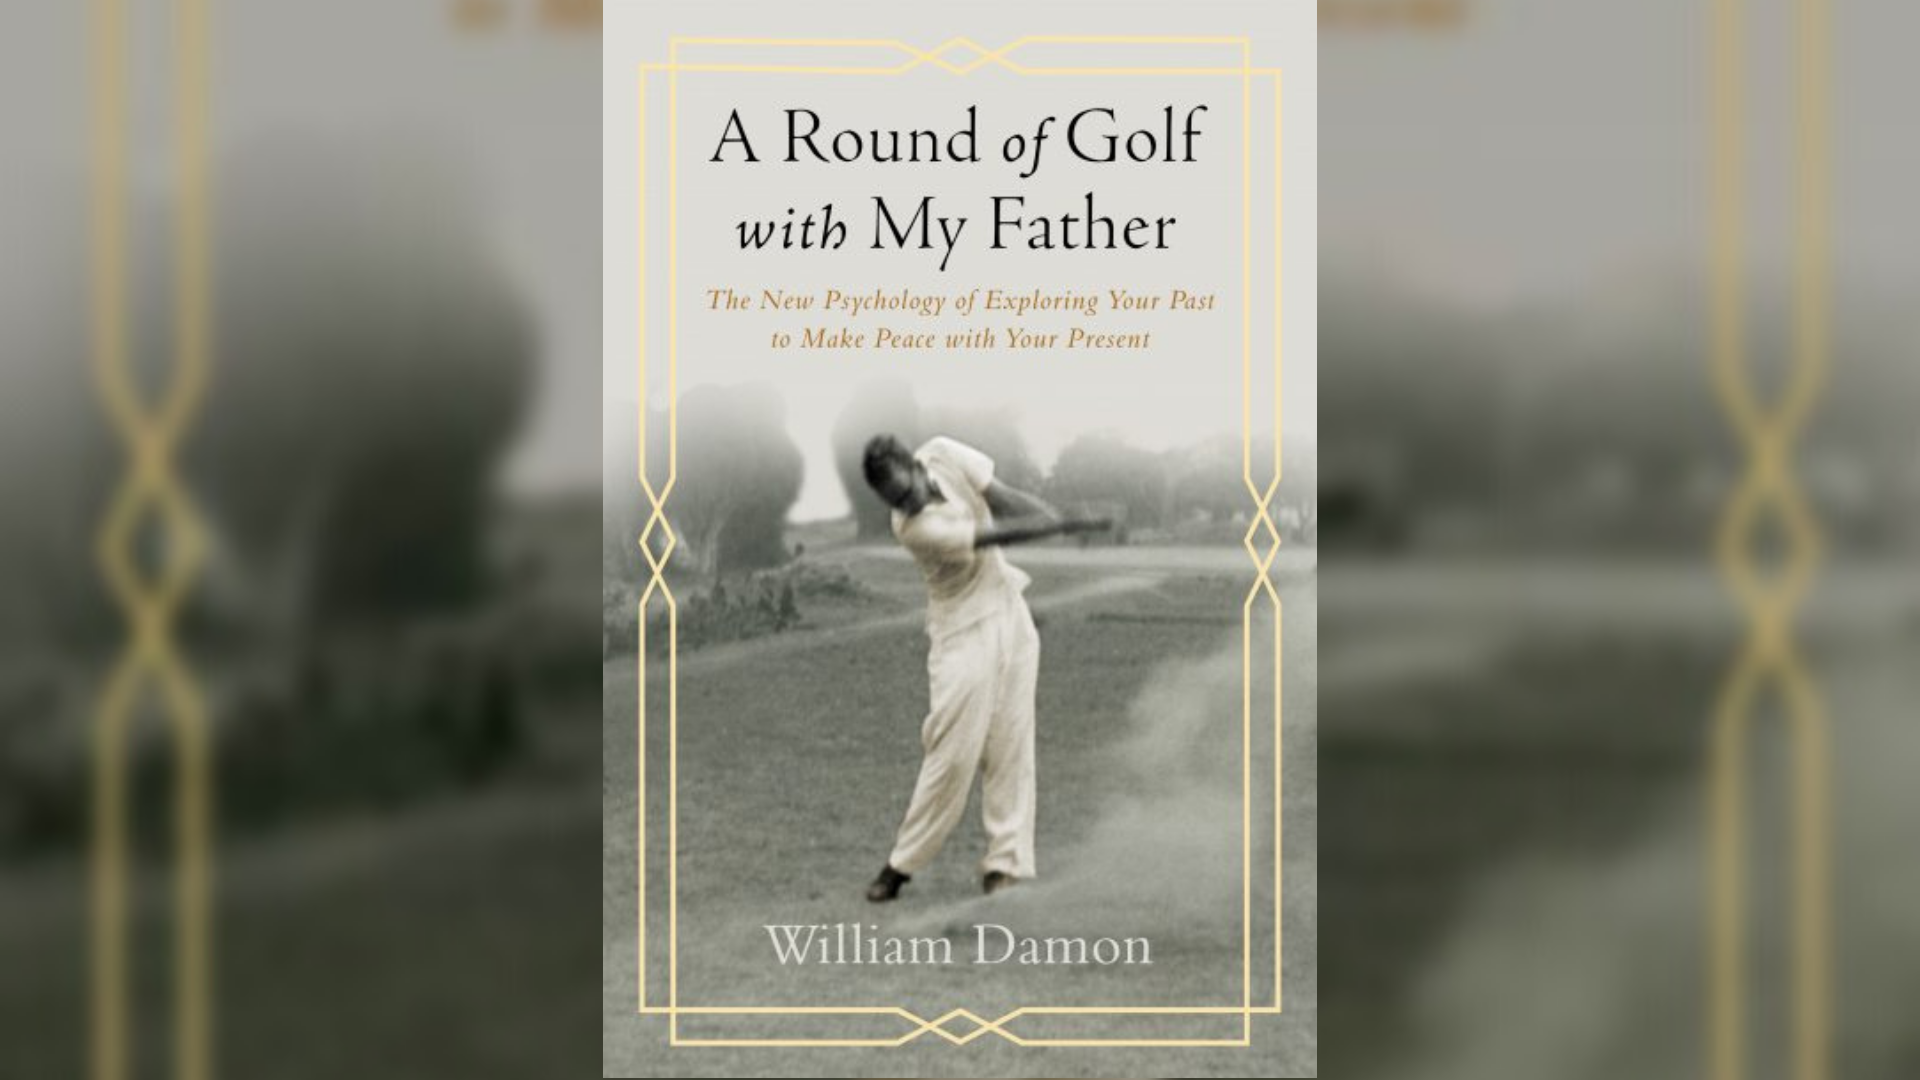 Author and psychologist William Damon introduces readers to the concept of a "life review" in his book "A Round of Golf with My Father." #newdaynw